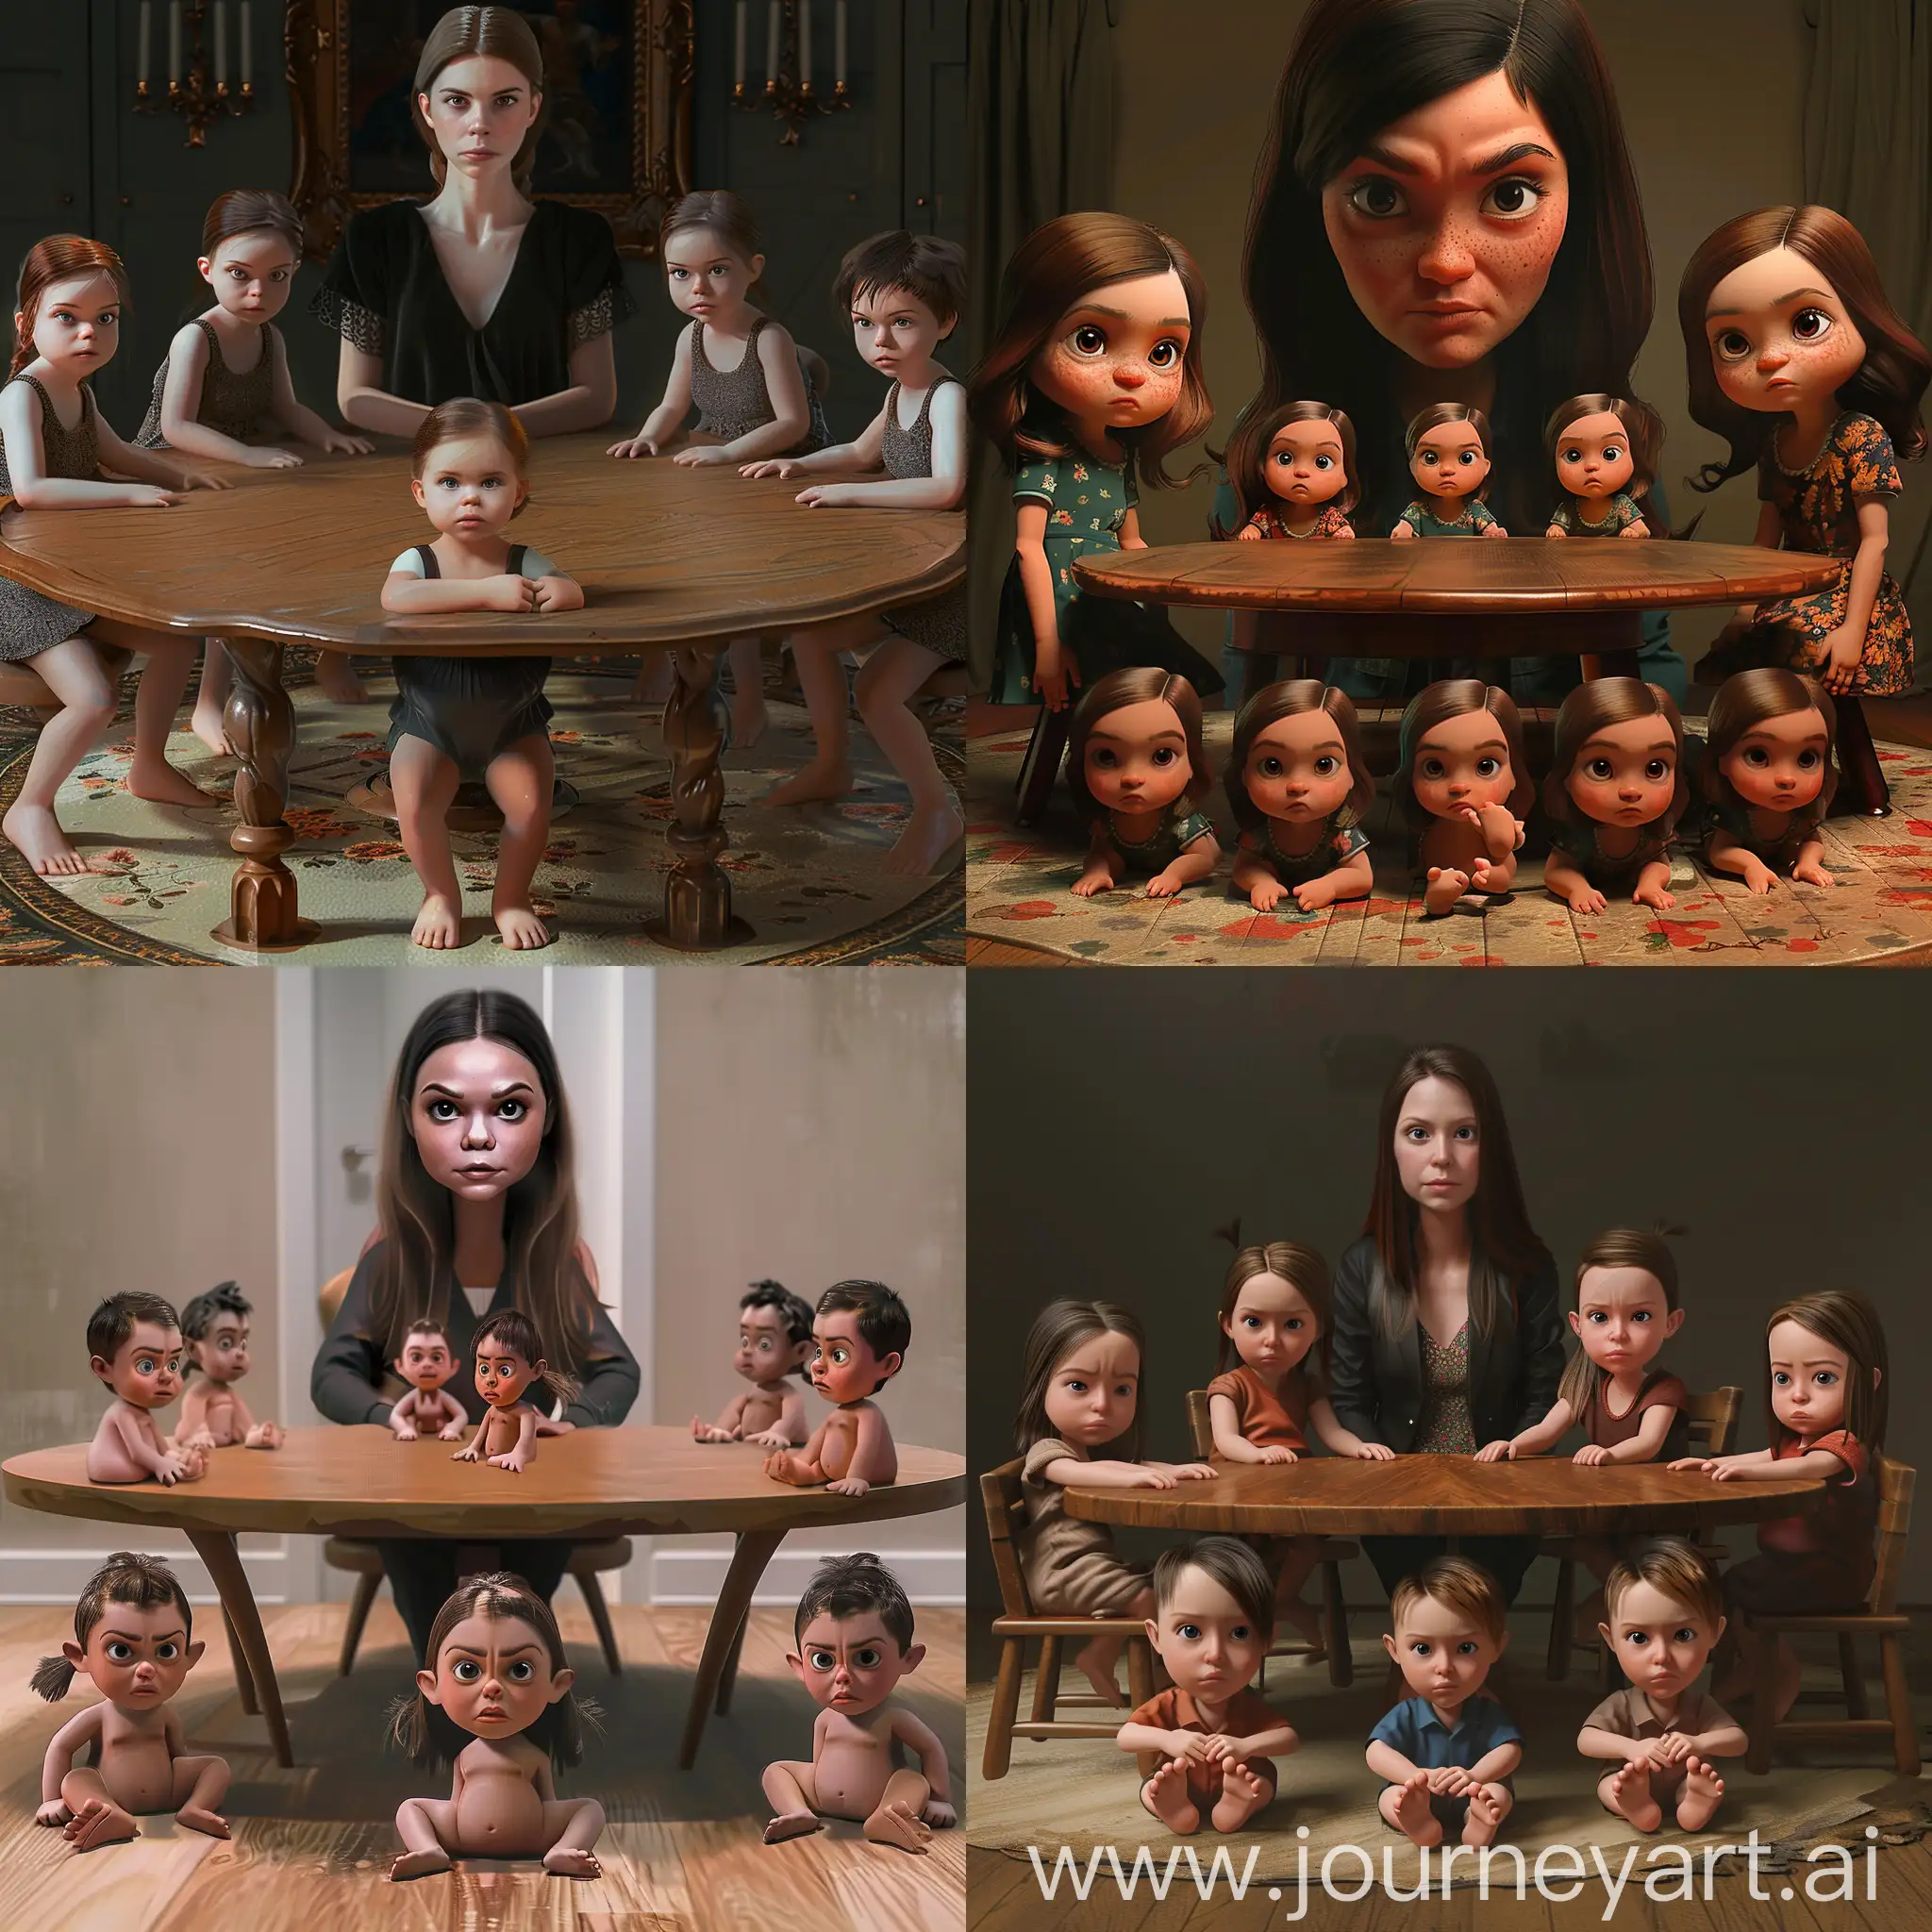 Serious-Adult-Woman-Surrounded-by-Animated-Children-at-Round-Table